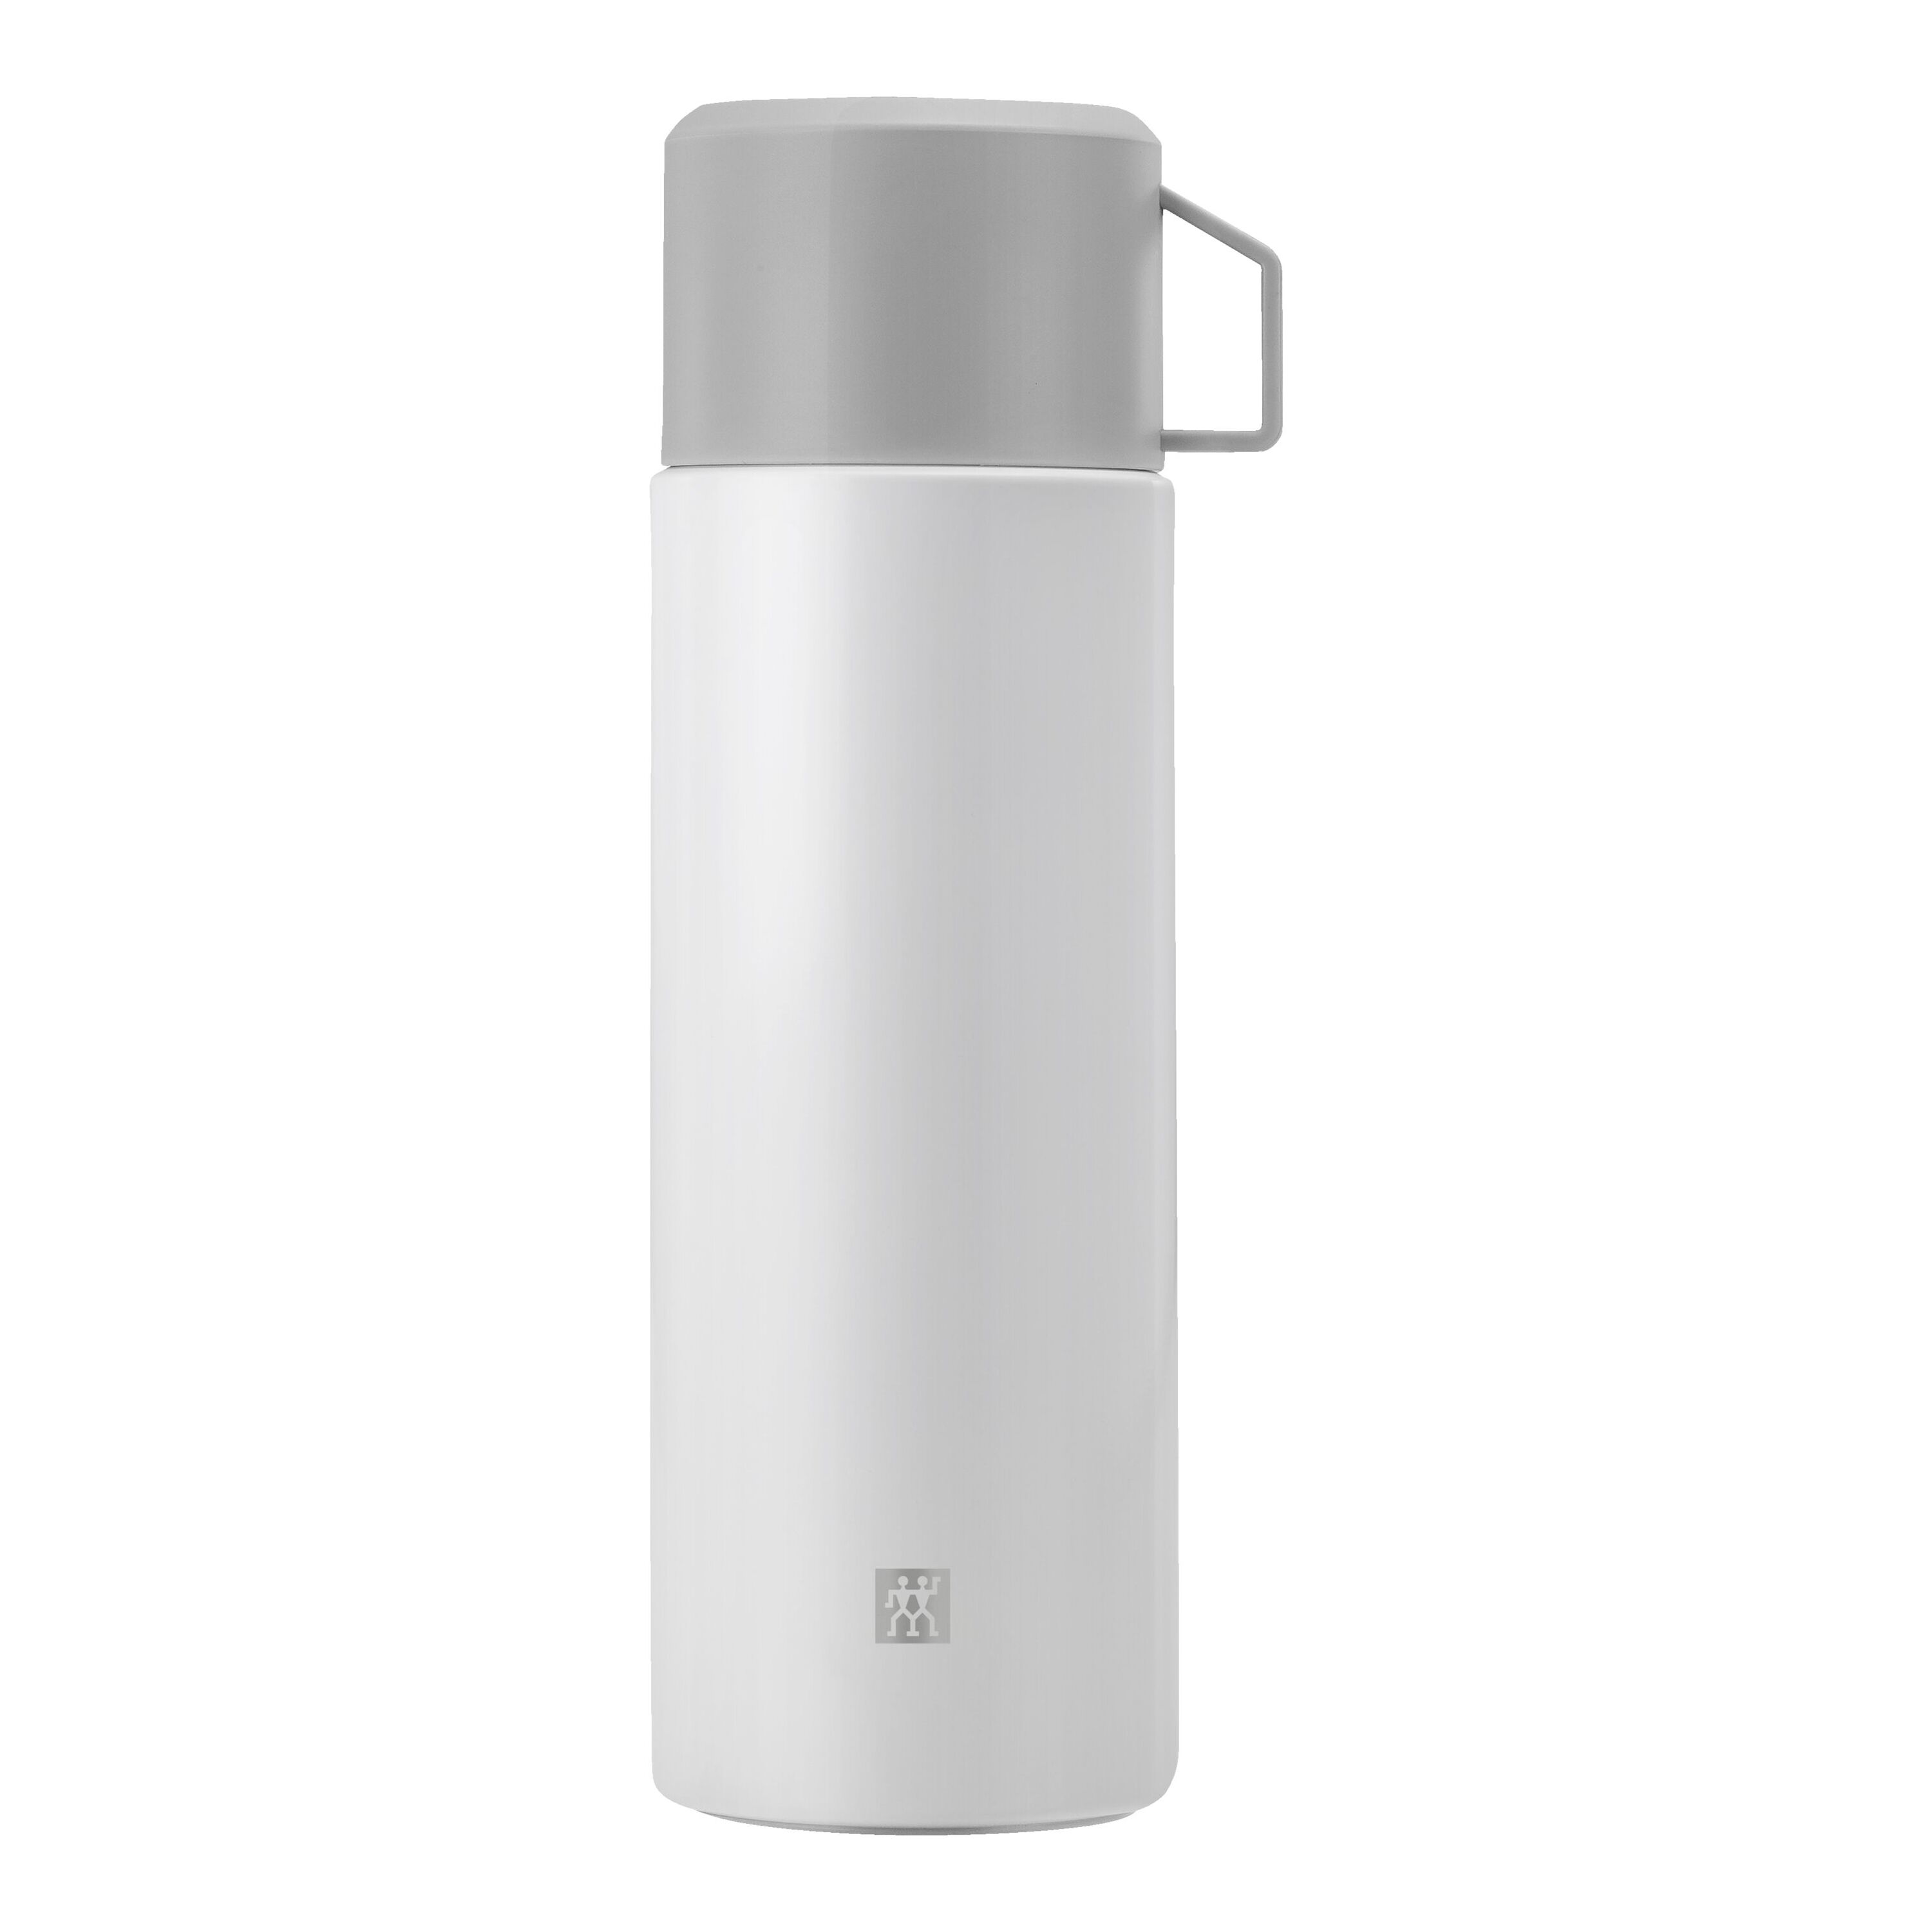 white thermo flask